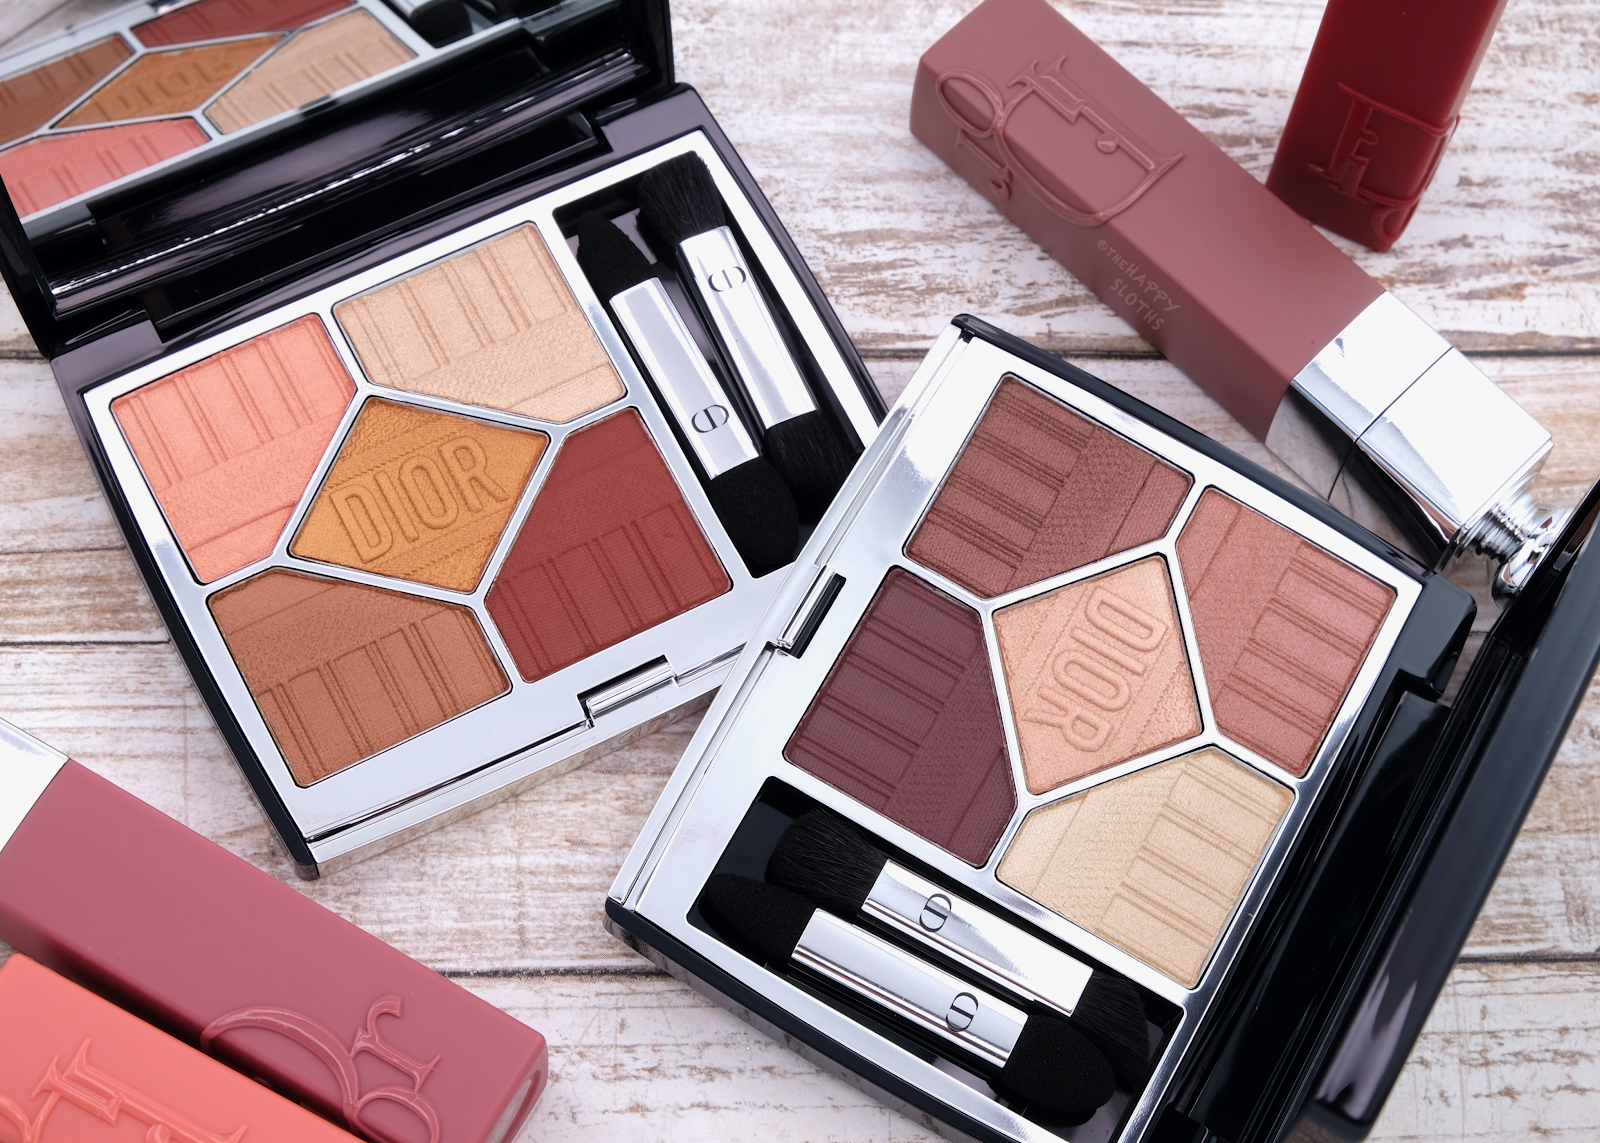 Dior | Summer 2022 Dioriviera Collection 5 Couleurs Couture Eyeshadow Palette: Review and Swatches